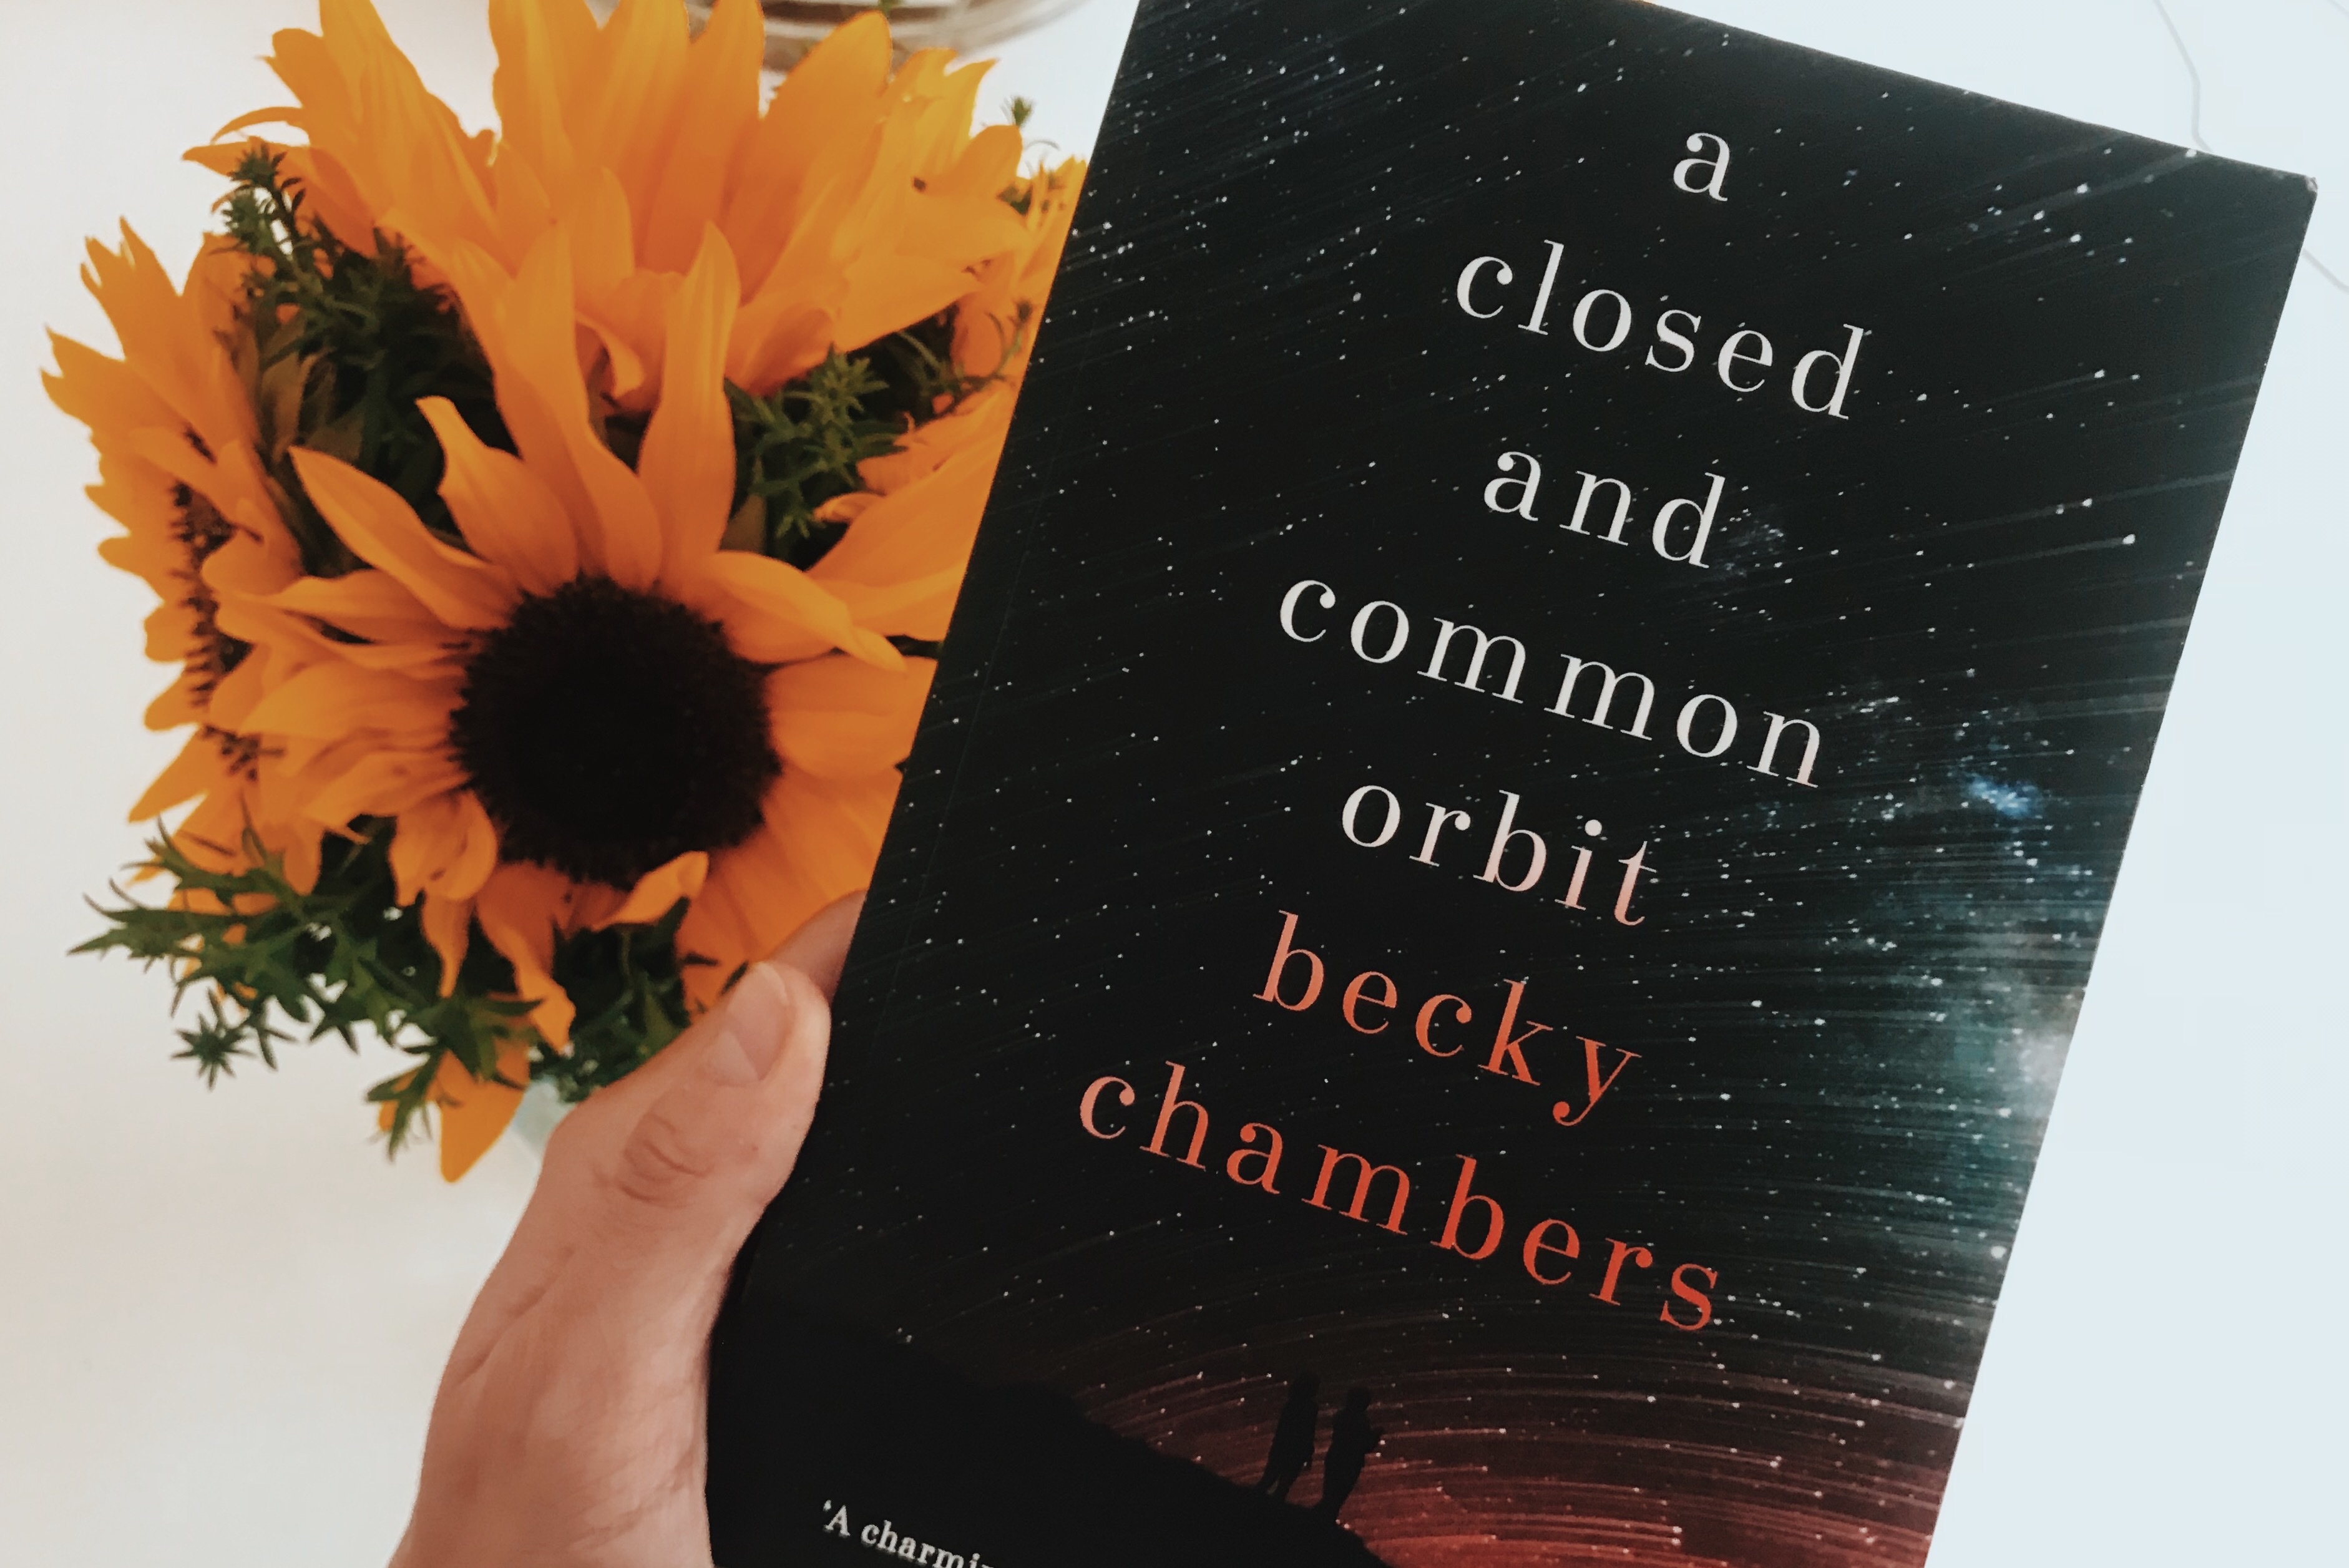 A Closed and Common Orbit, Becky Chambers